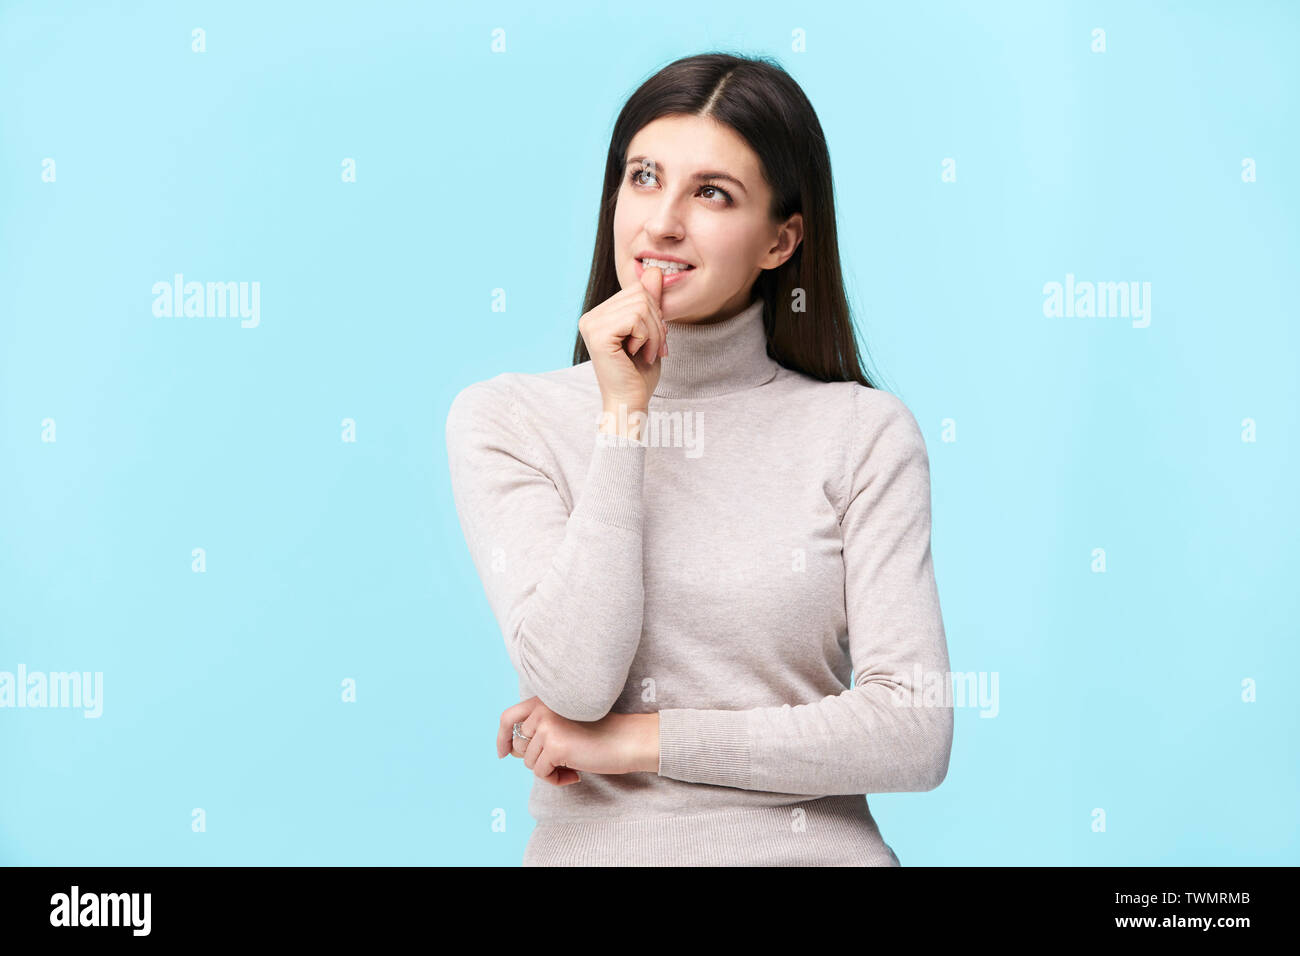 studio portrait of a beautful caucasian woman, looking up thinking, finger on lip, isolated on blue background Stock Photo